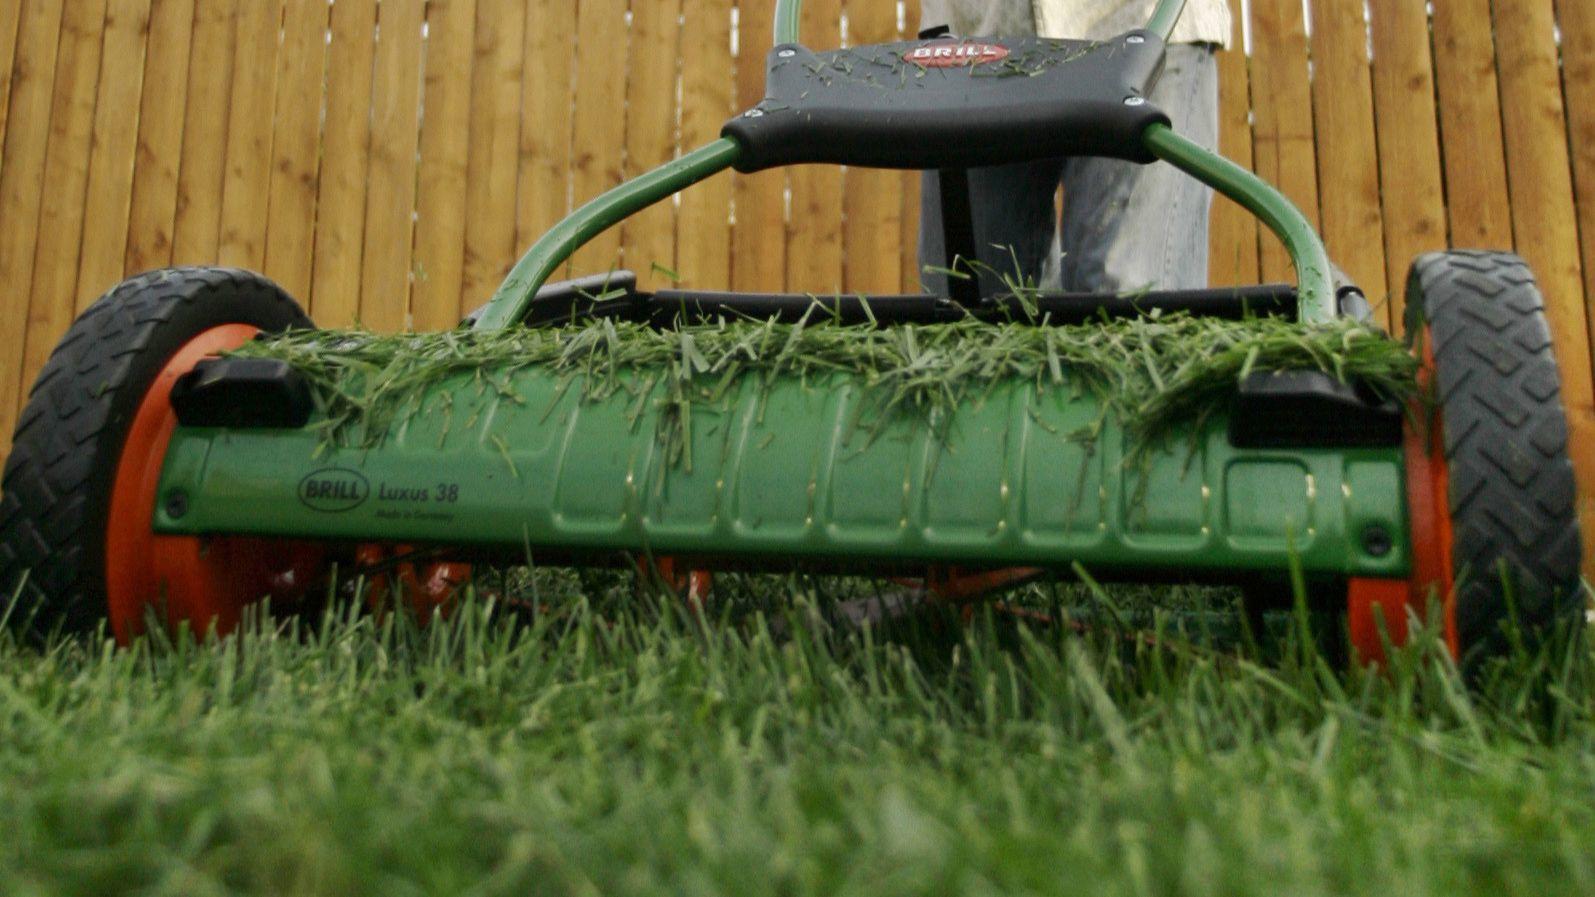 want-to-ditch-the-lawn-turf-removal-rebates-are-coming-back-la-times